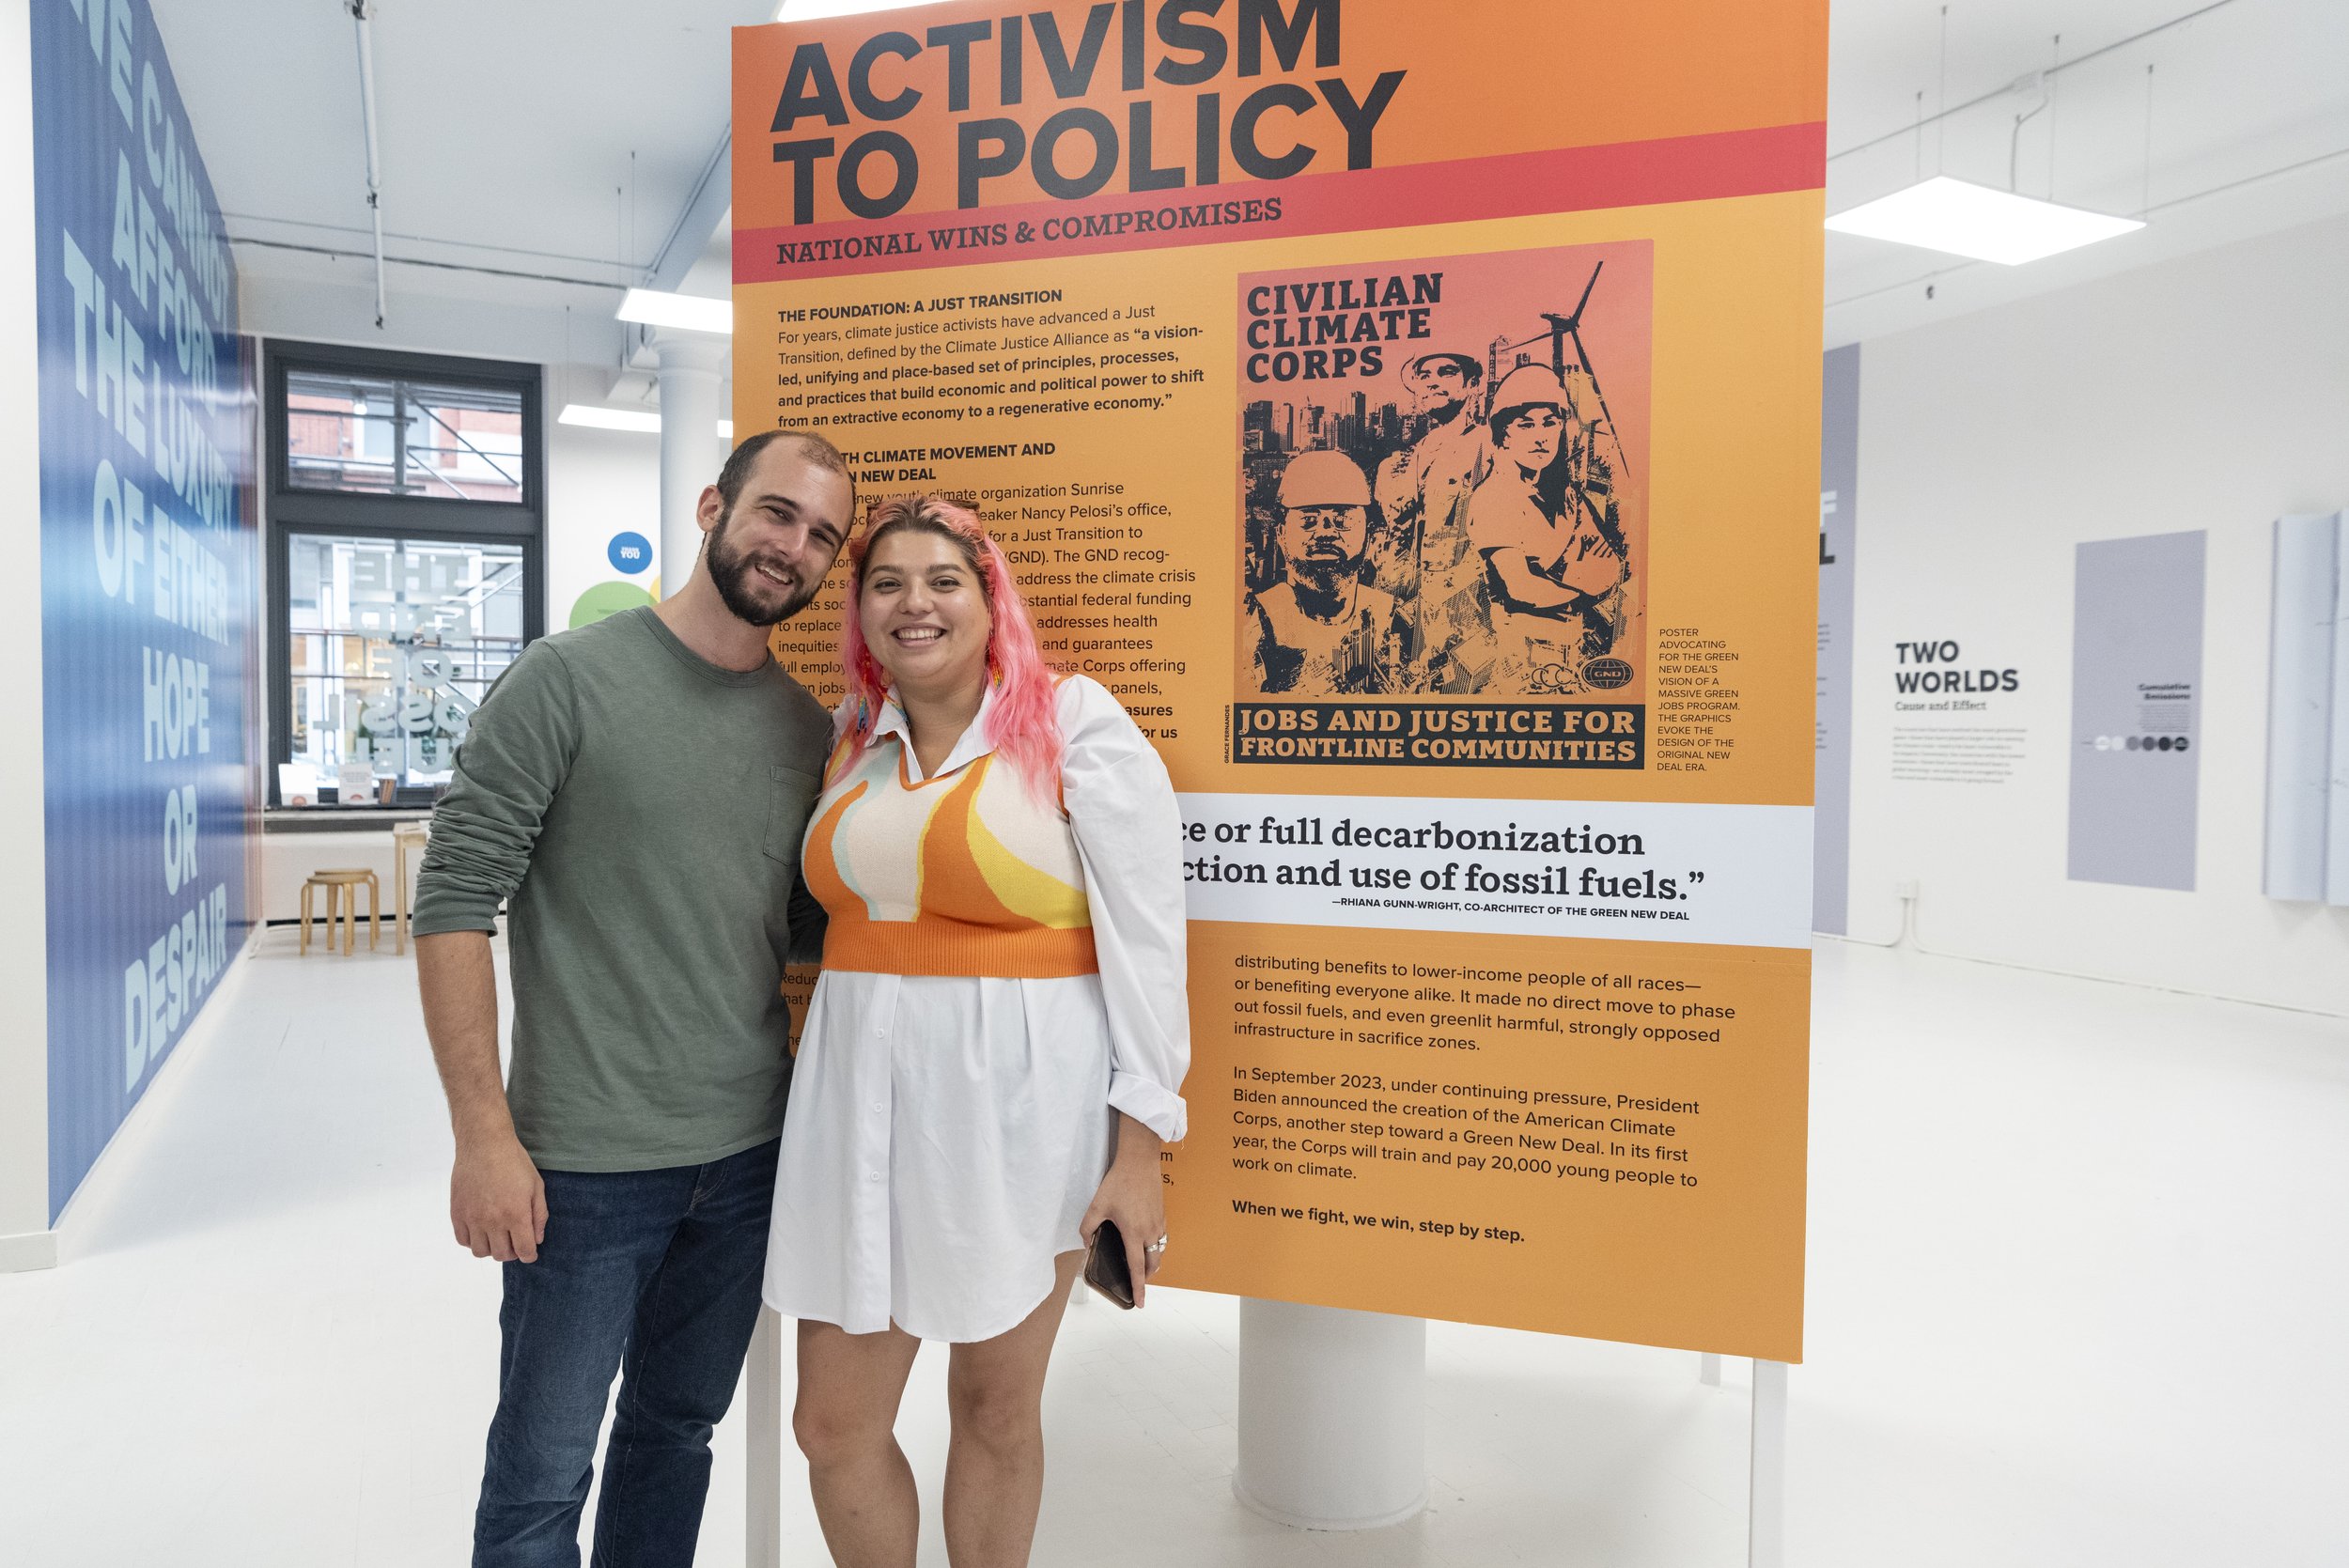 Activism to Policy